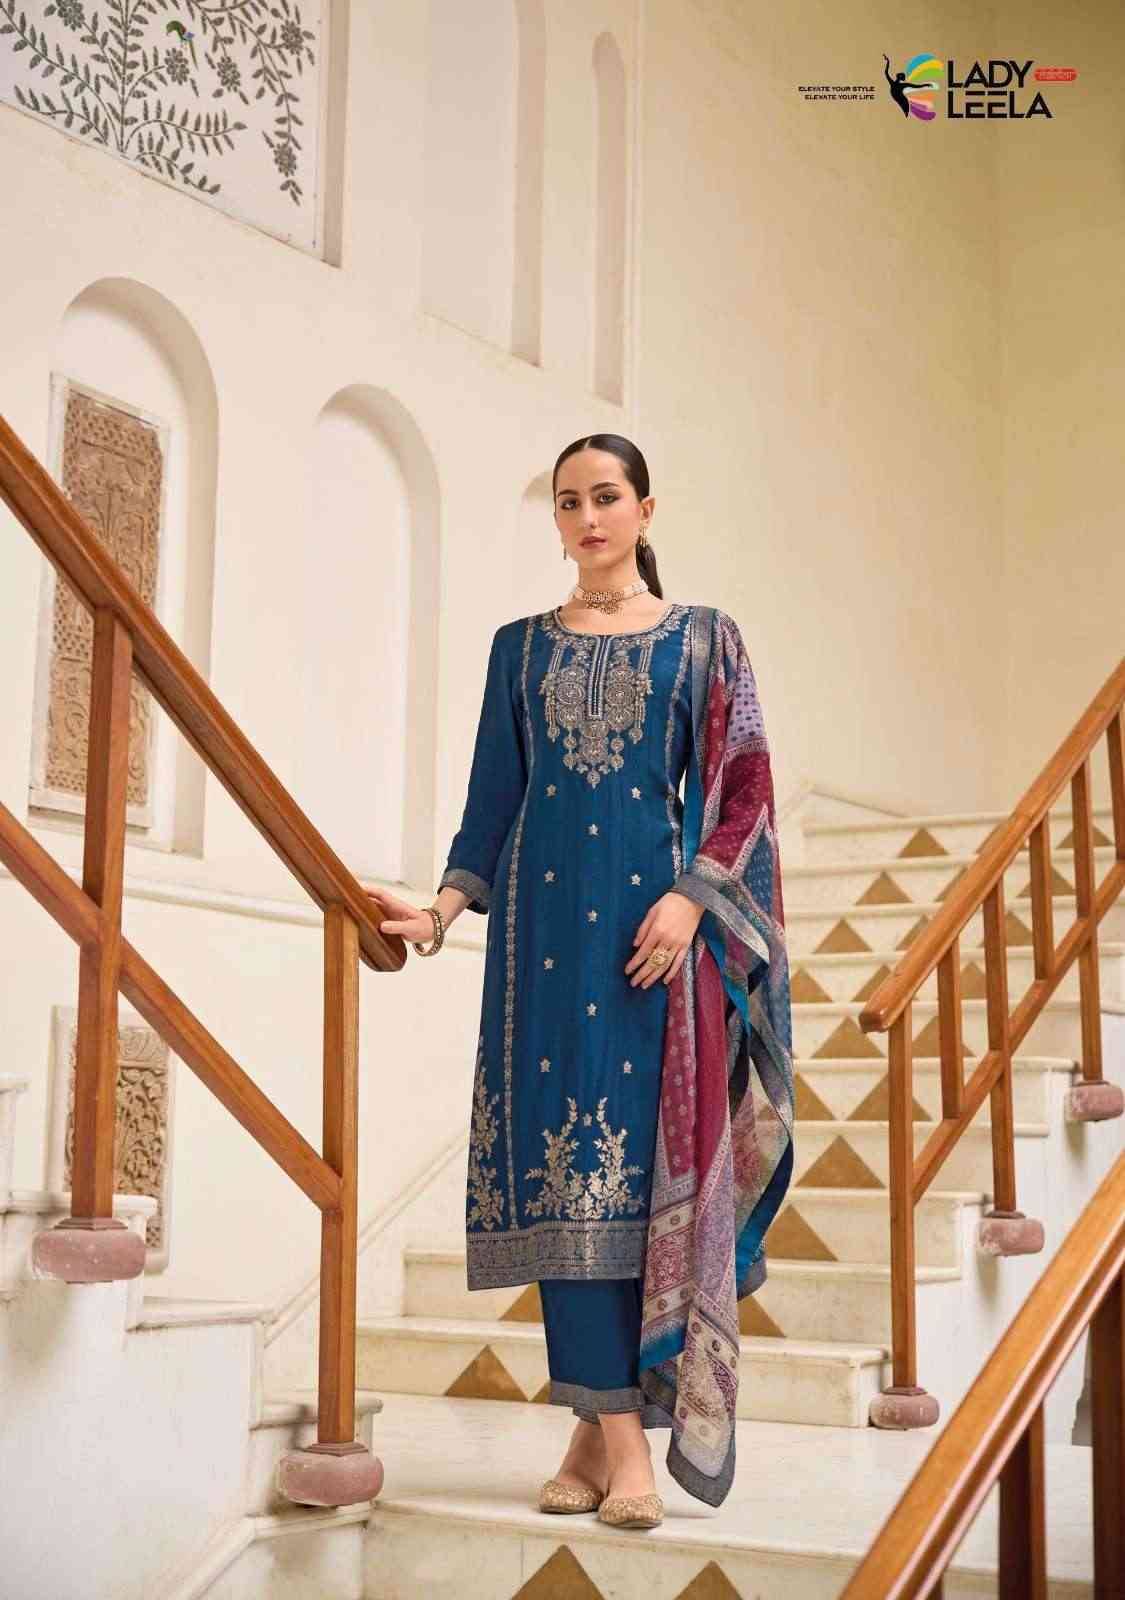 Libaas Vol-2 By Lady Leela 1241 To 1246 Series Beautiful Festive Suits Colorful Stylish Fancy Casual Wear & Ethnic Wear Pure Viscose Jacquard Dresses At Wholesale Price